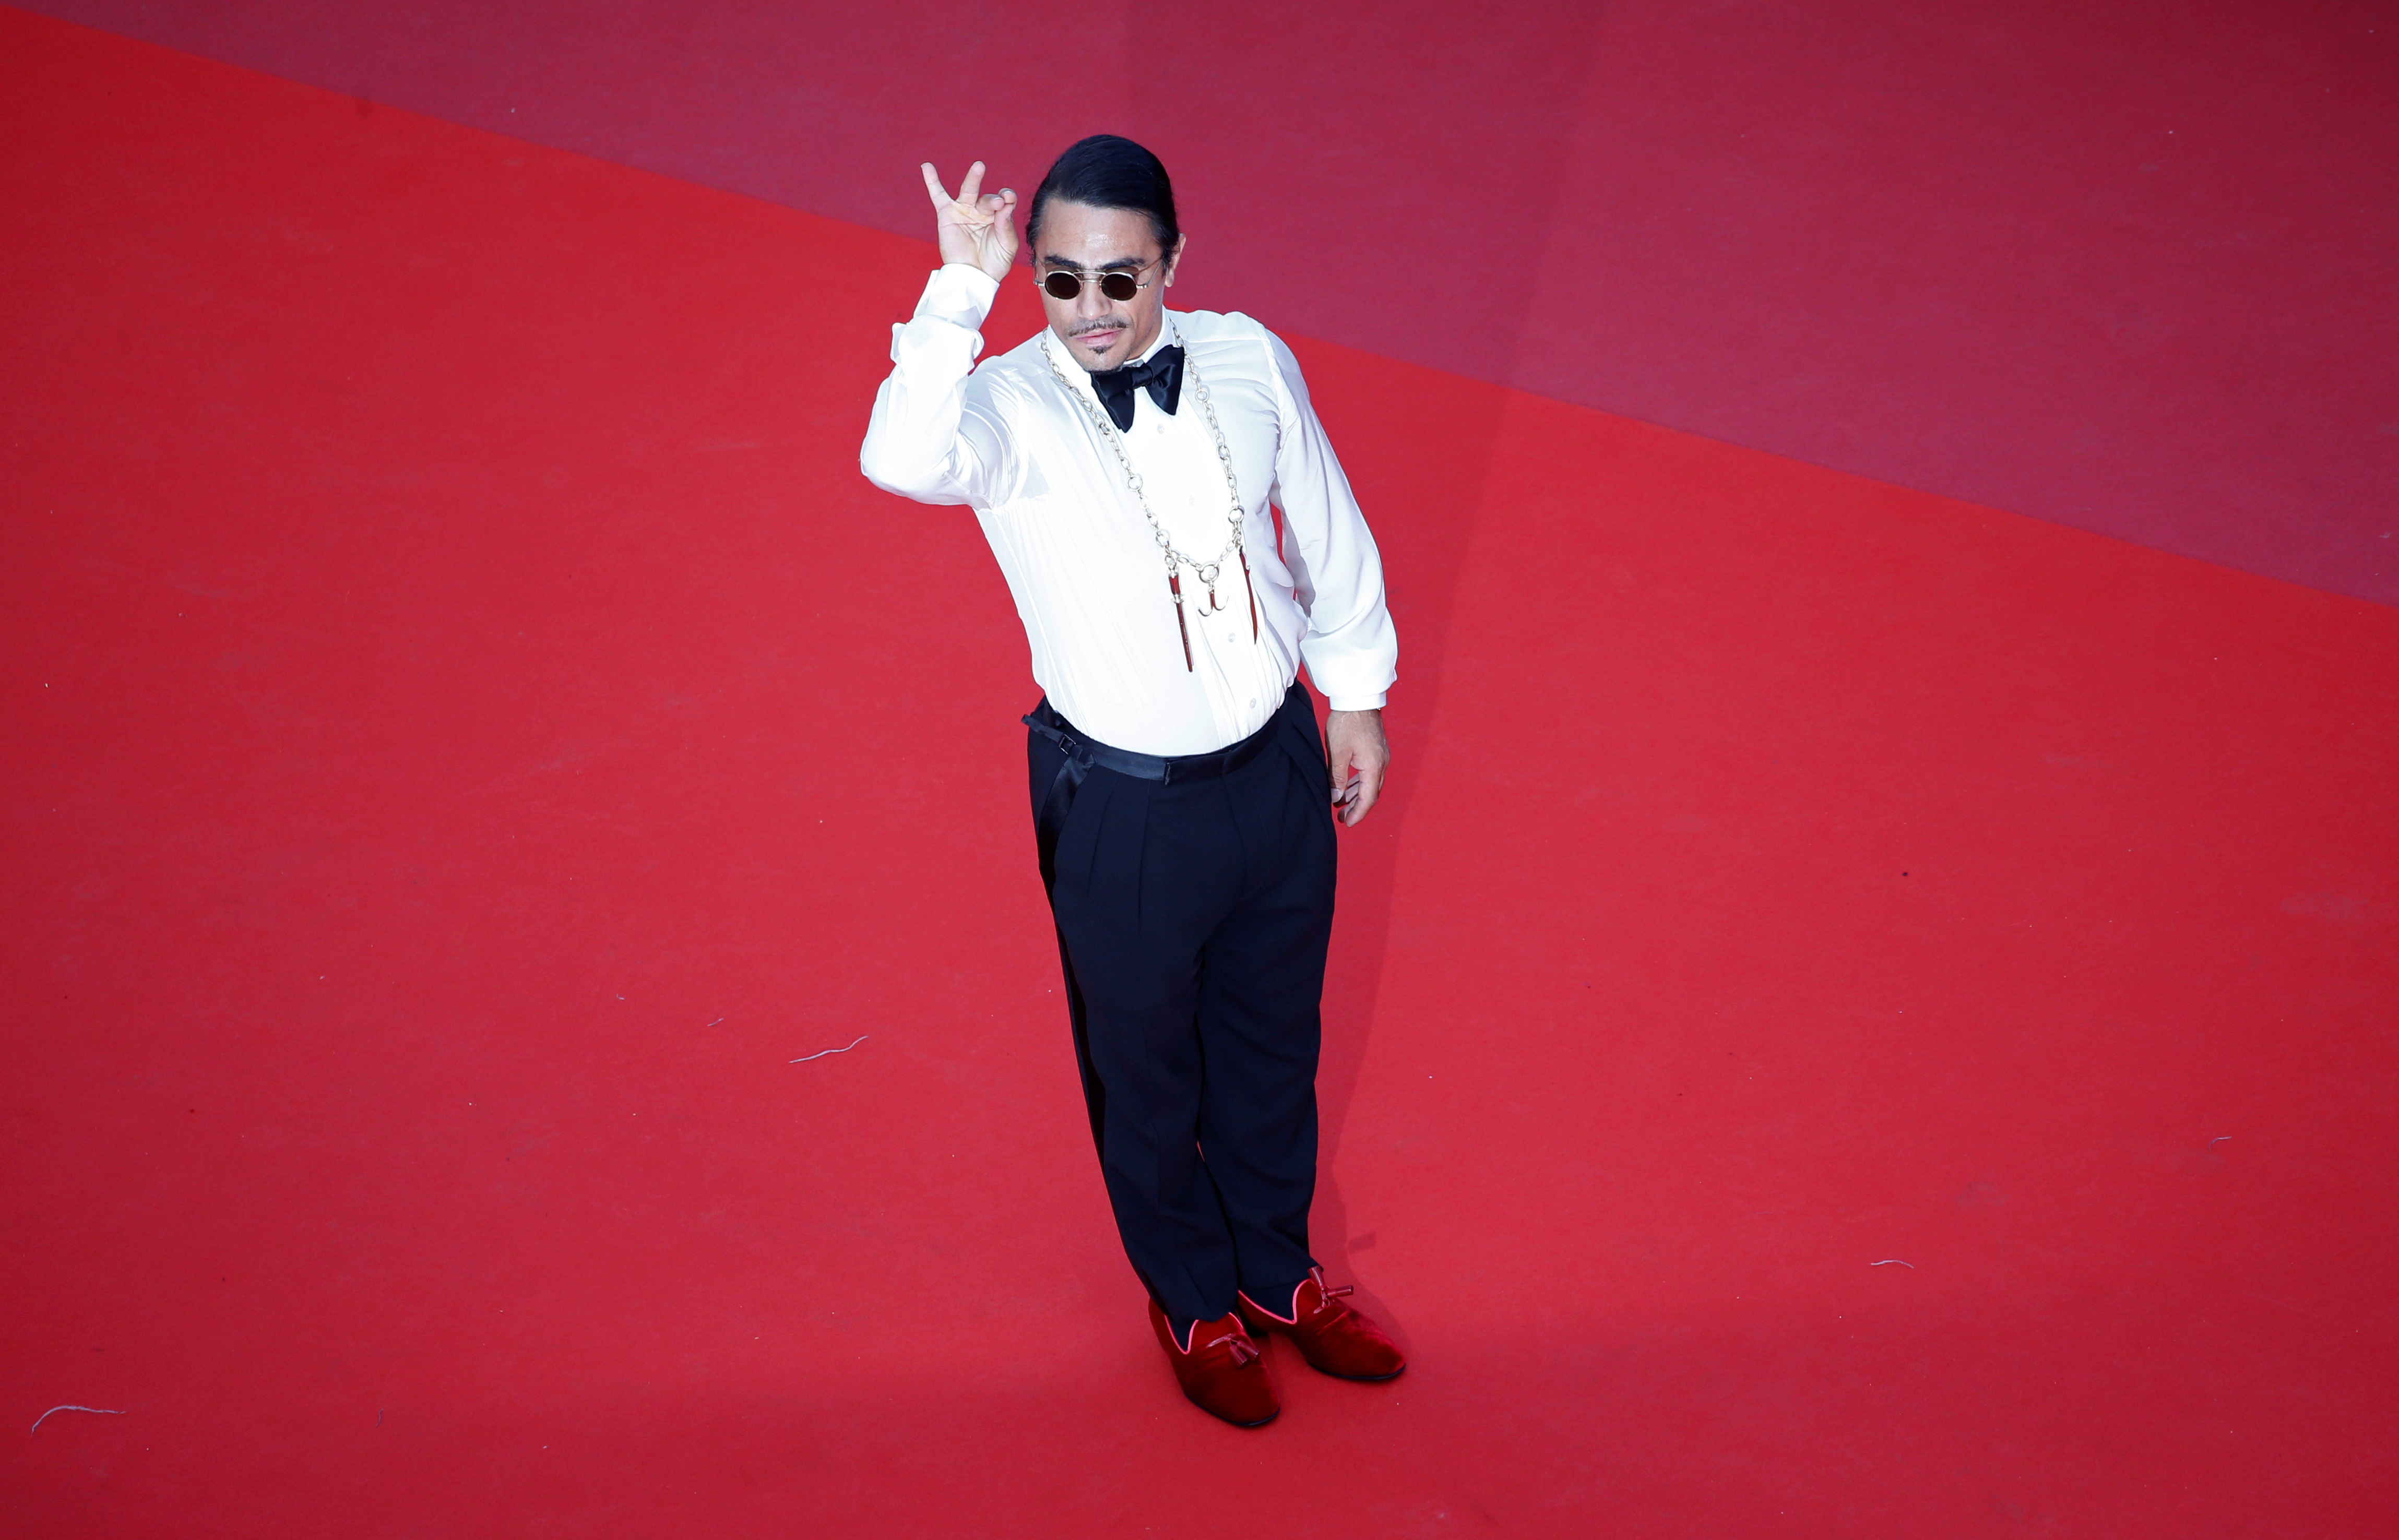 Nusret Gokce, known as Salt Bae, poses.at the 72nd Cannes Film Festival